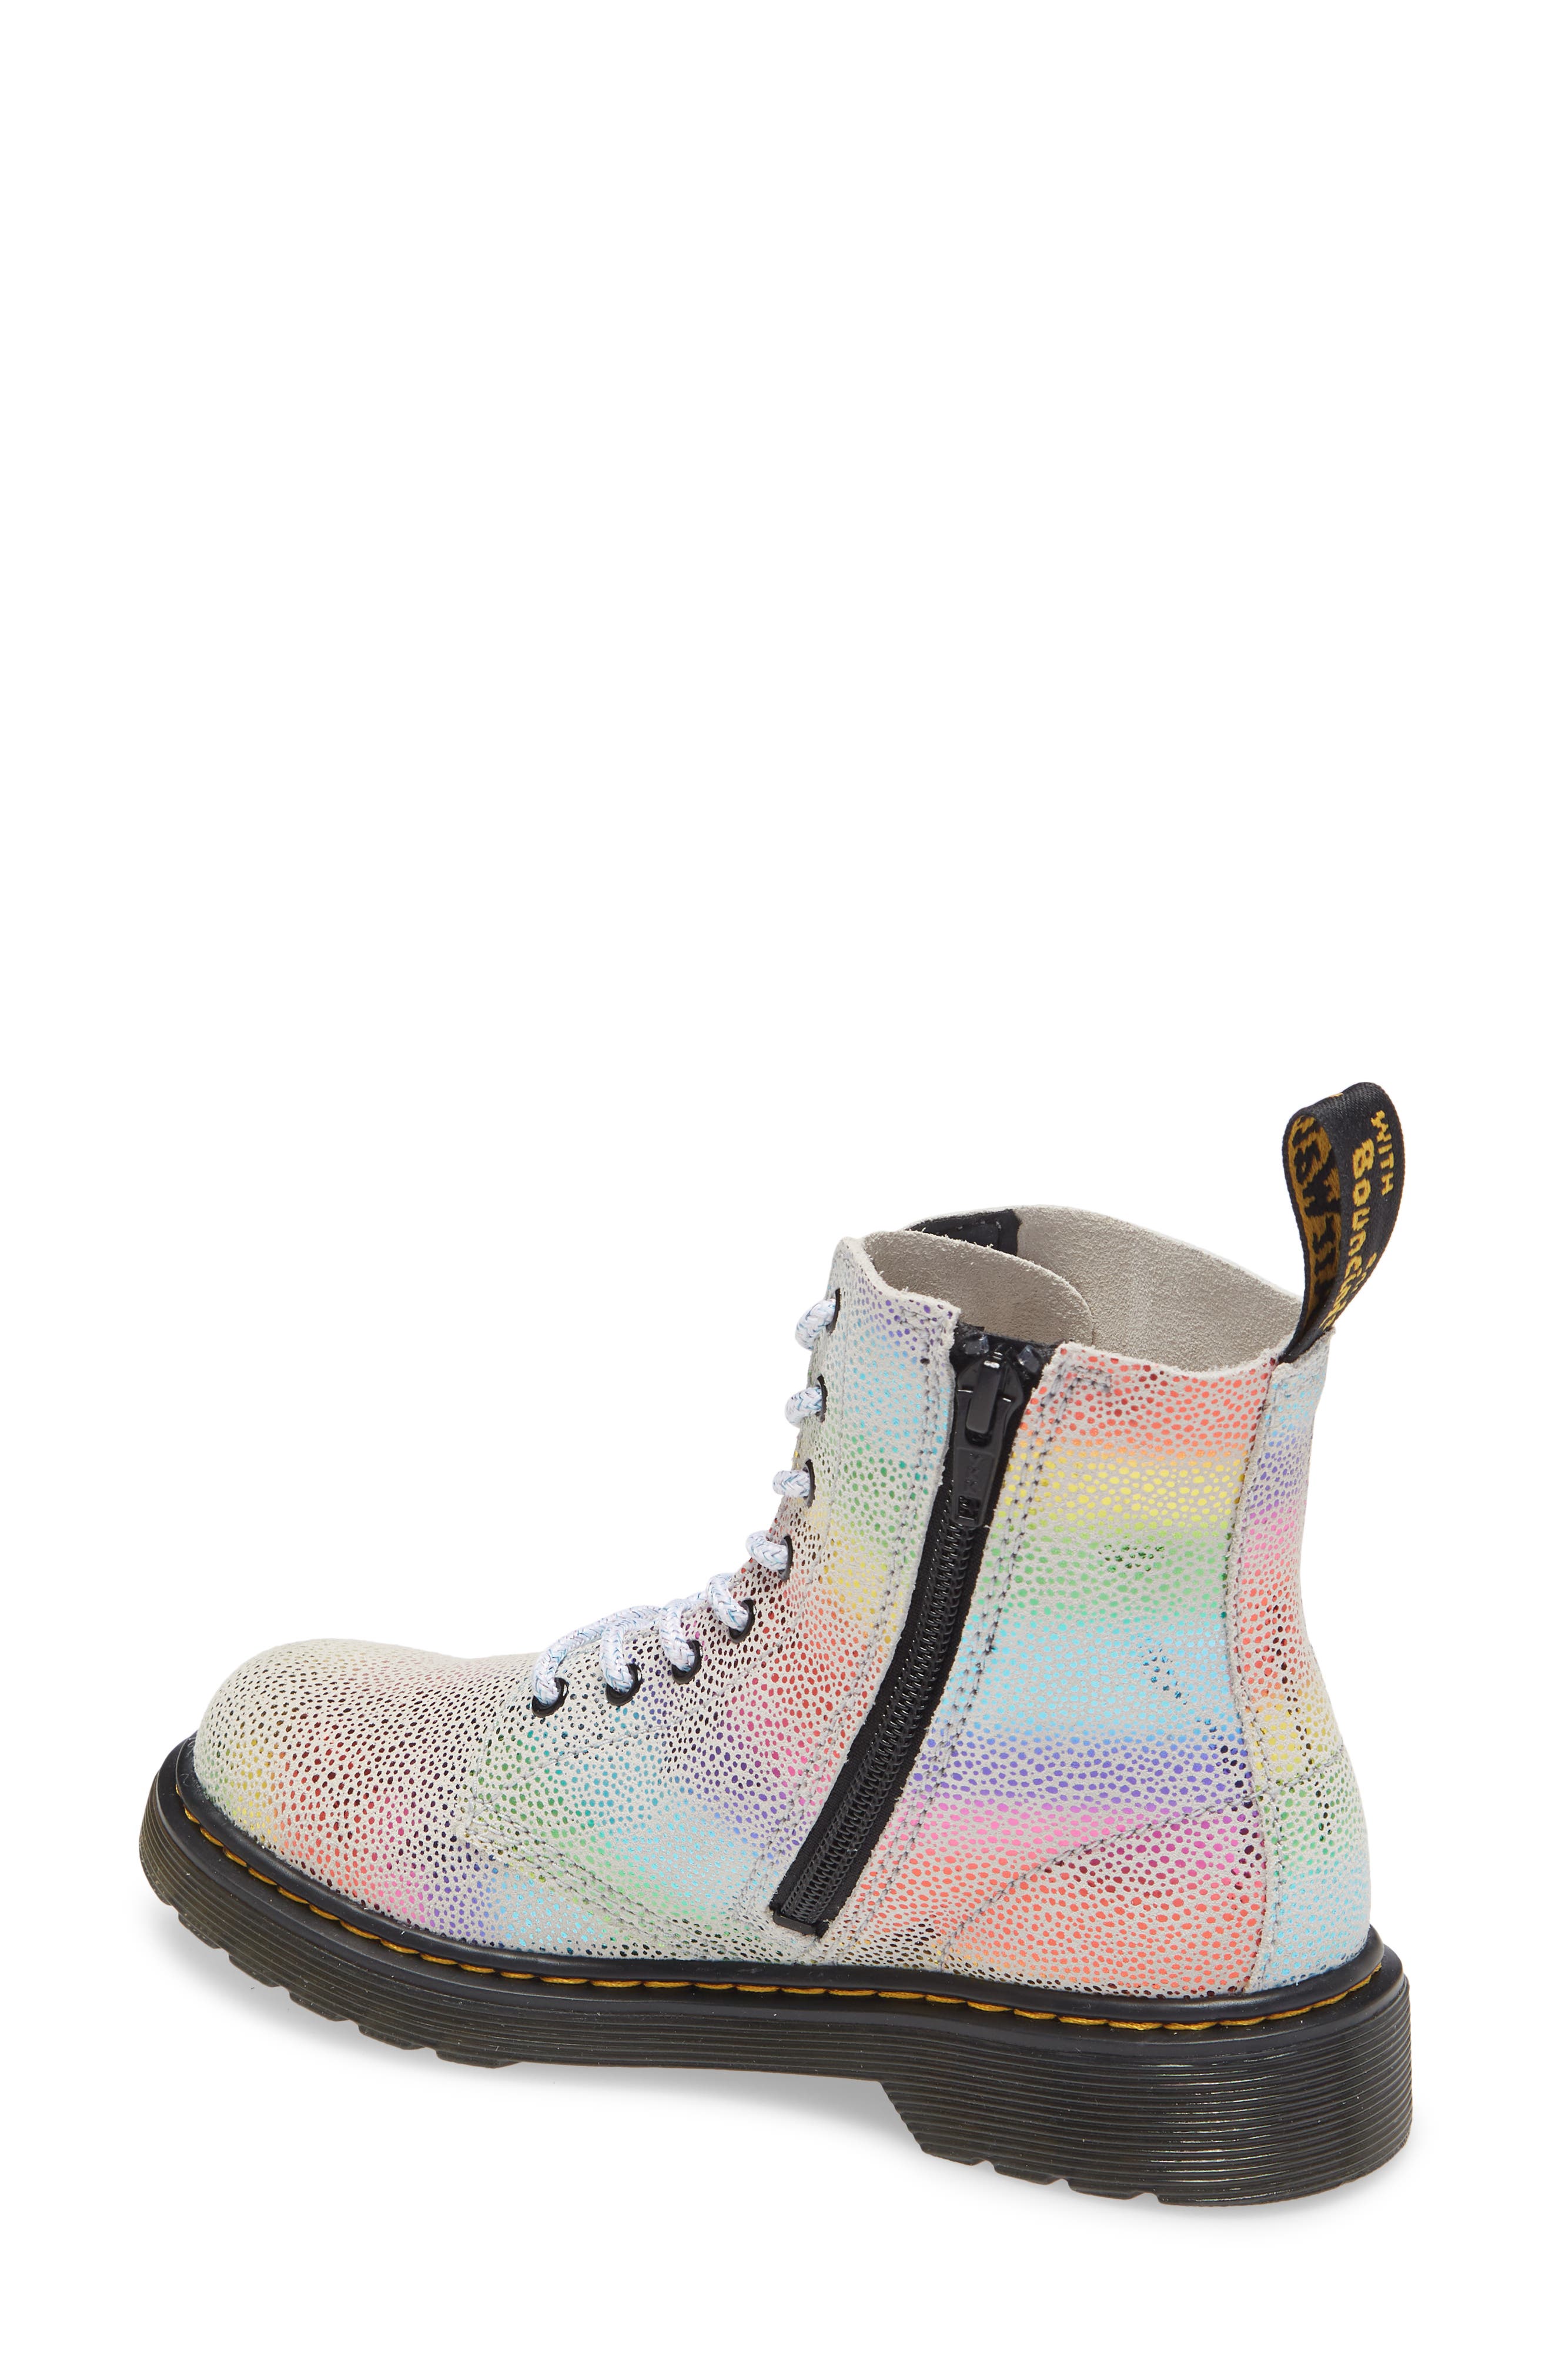 BOOTS RAINBOW PASTEL Rainbow Star's WomenS Boots Care Bear Rainbow Boots Unicorn Boots Ankle Boots Custom Made Boots